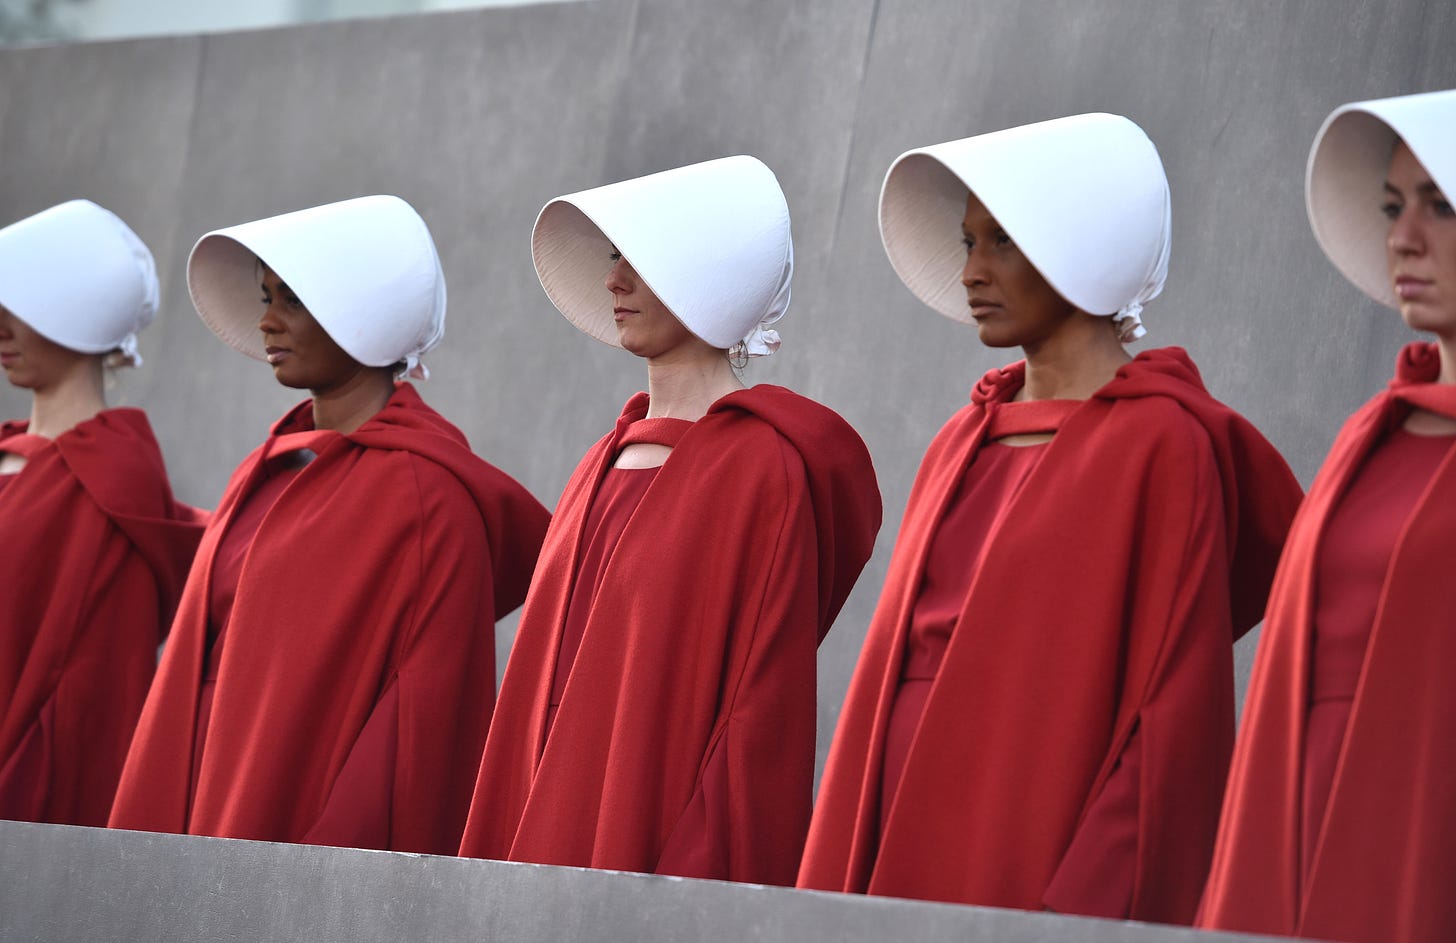 Brett Kavanaugh Supreme Court Seat Protested by Handmaids Tale | IndieWire